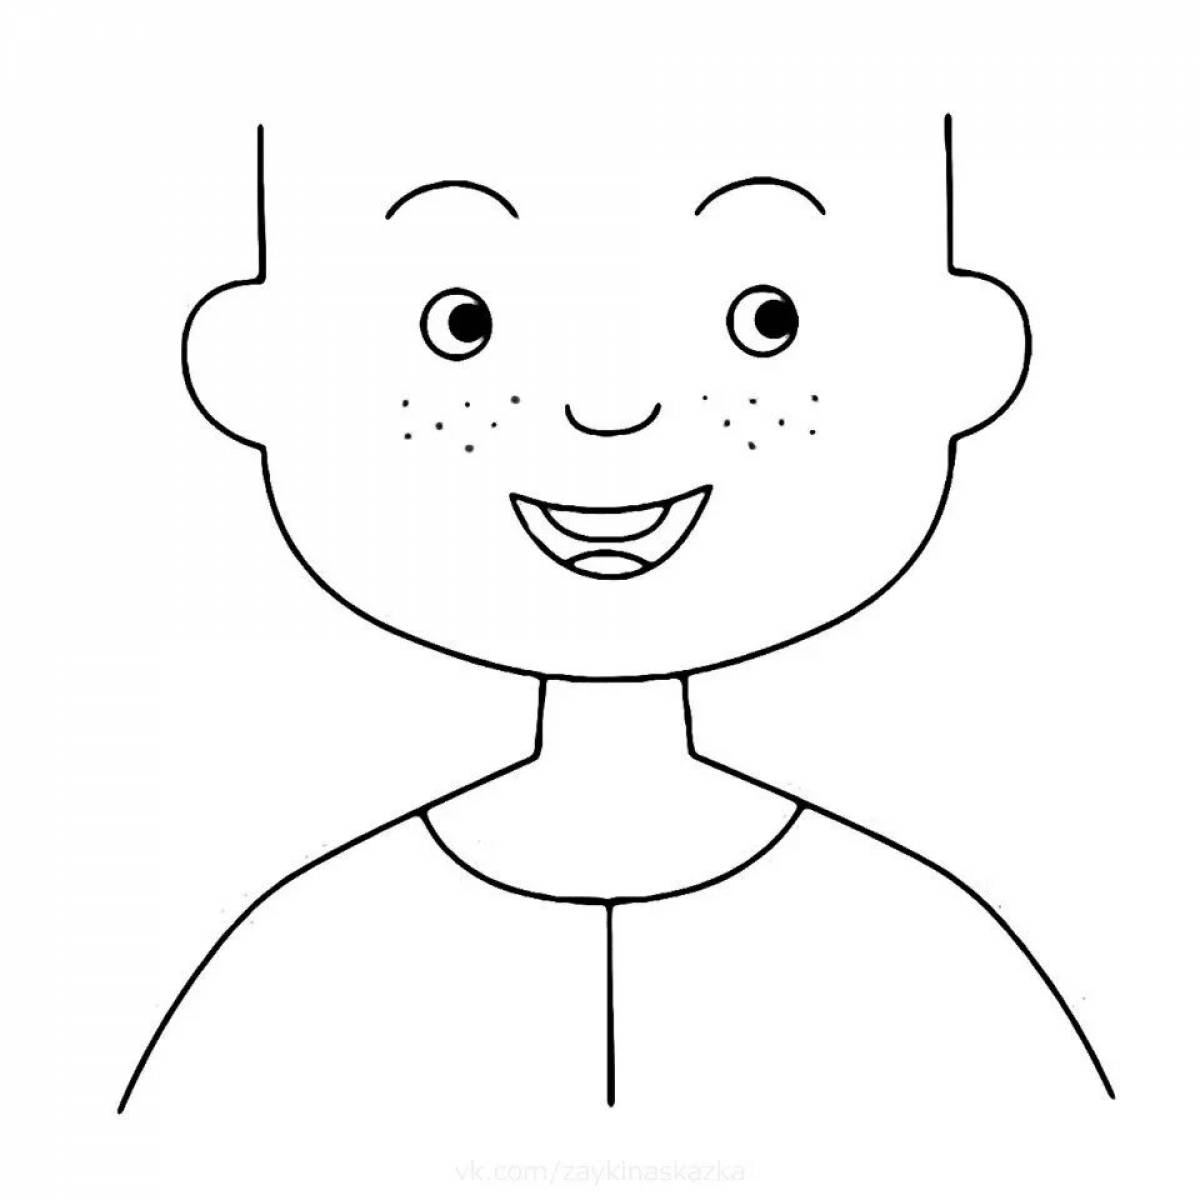 Blissful baby face coloring book for kids